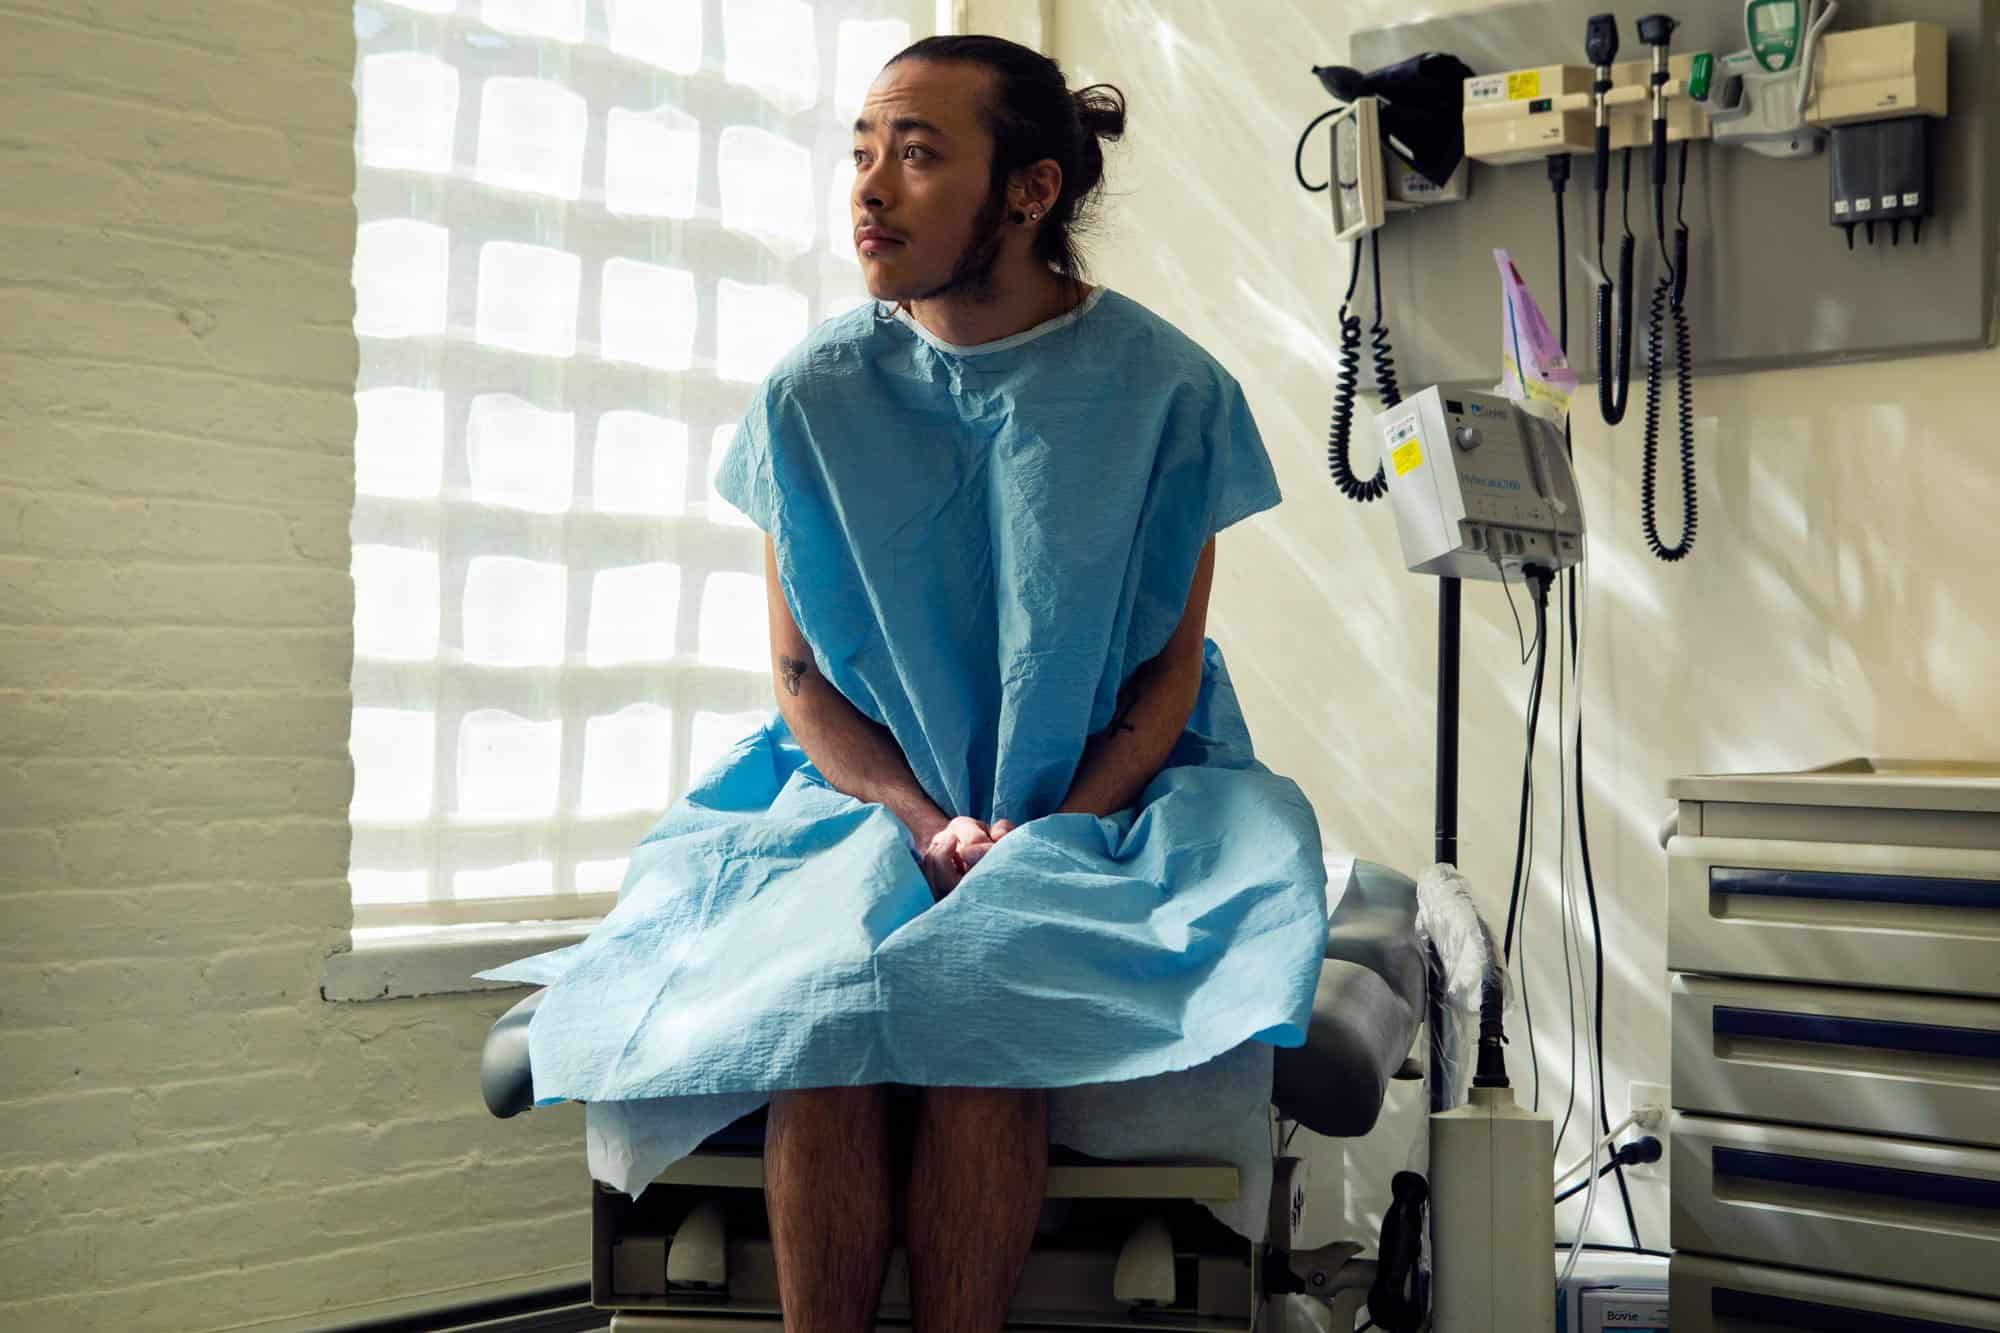 A genderqueer person sitting in a hospital gown in an exam room